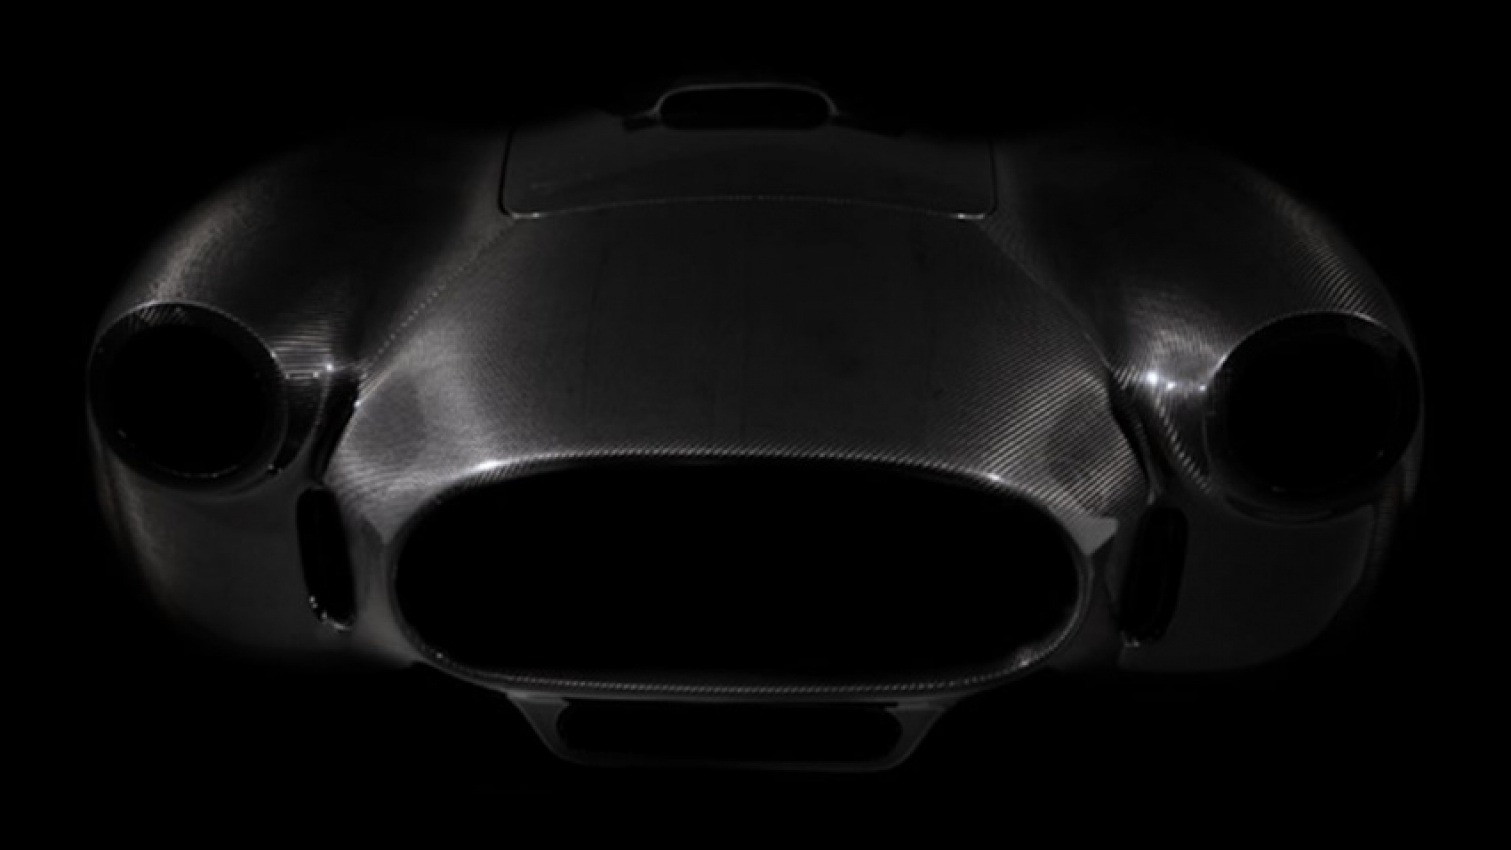 autos, cars, shelby, aftermarket, classics, convertible, lightweight vehicles, performance, shelby now offers a $1 million carbon fiber cobra